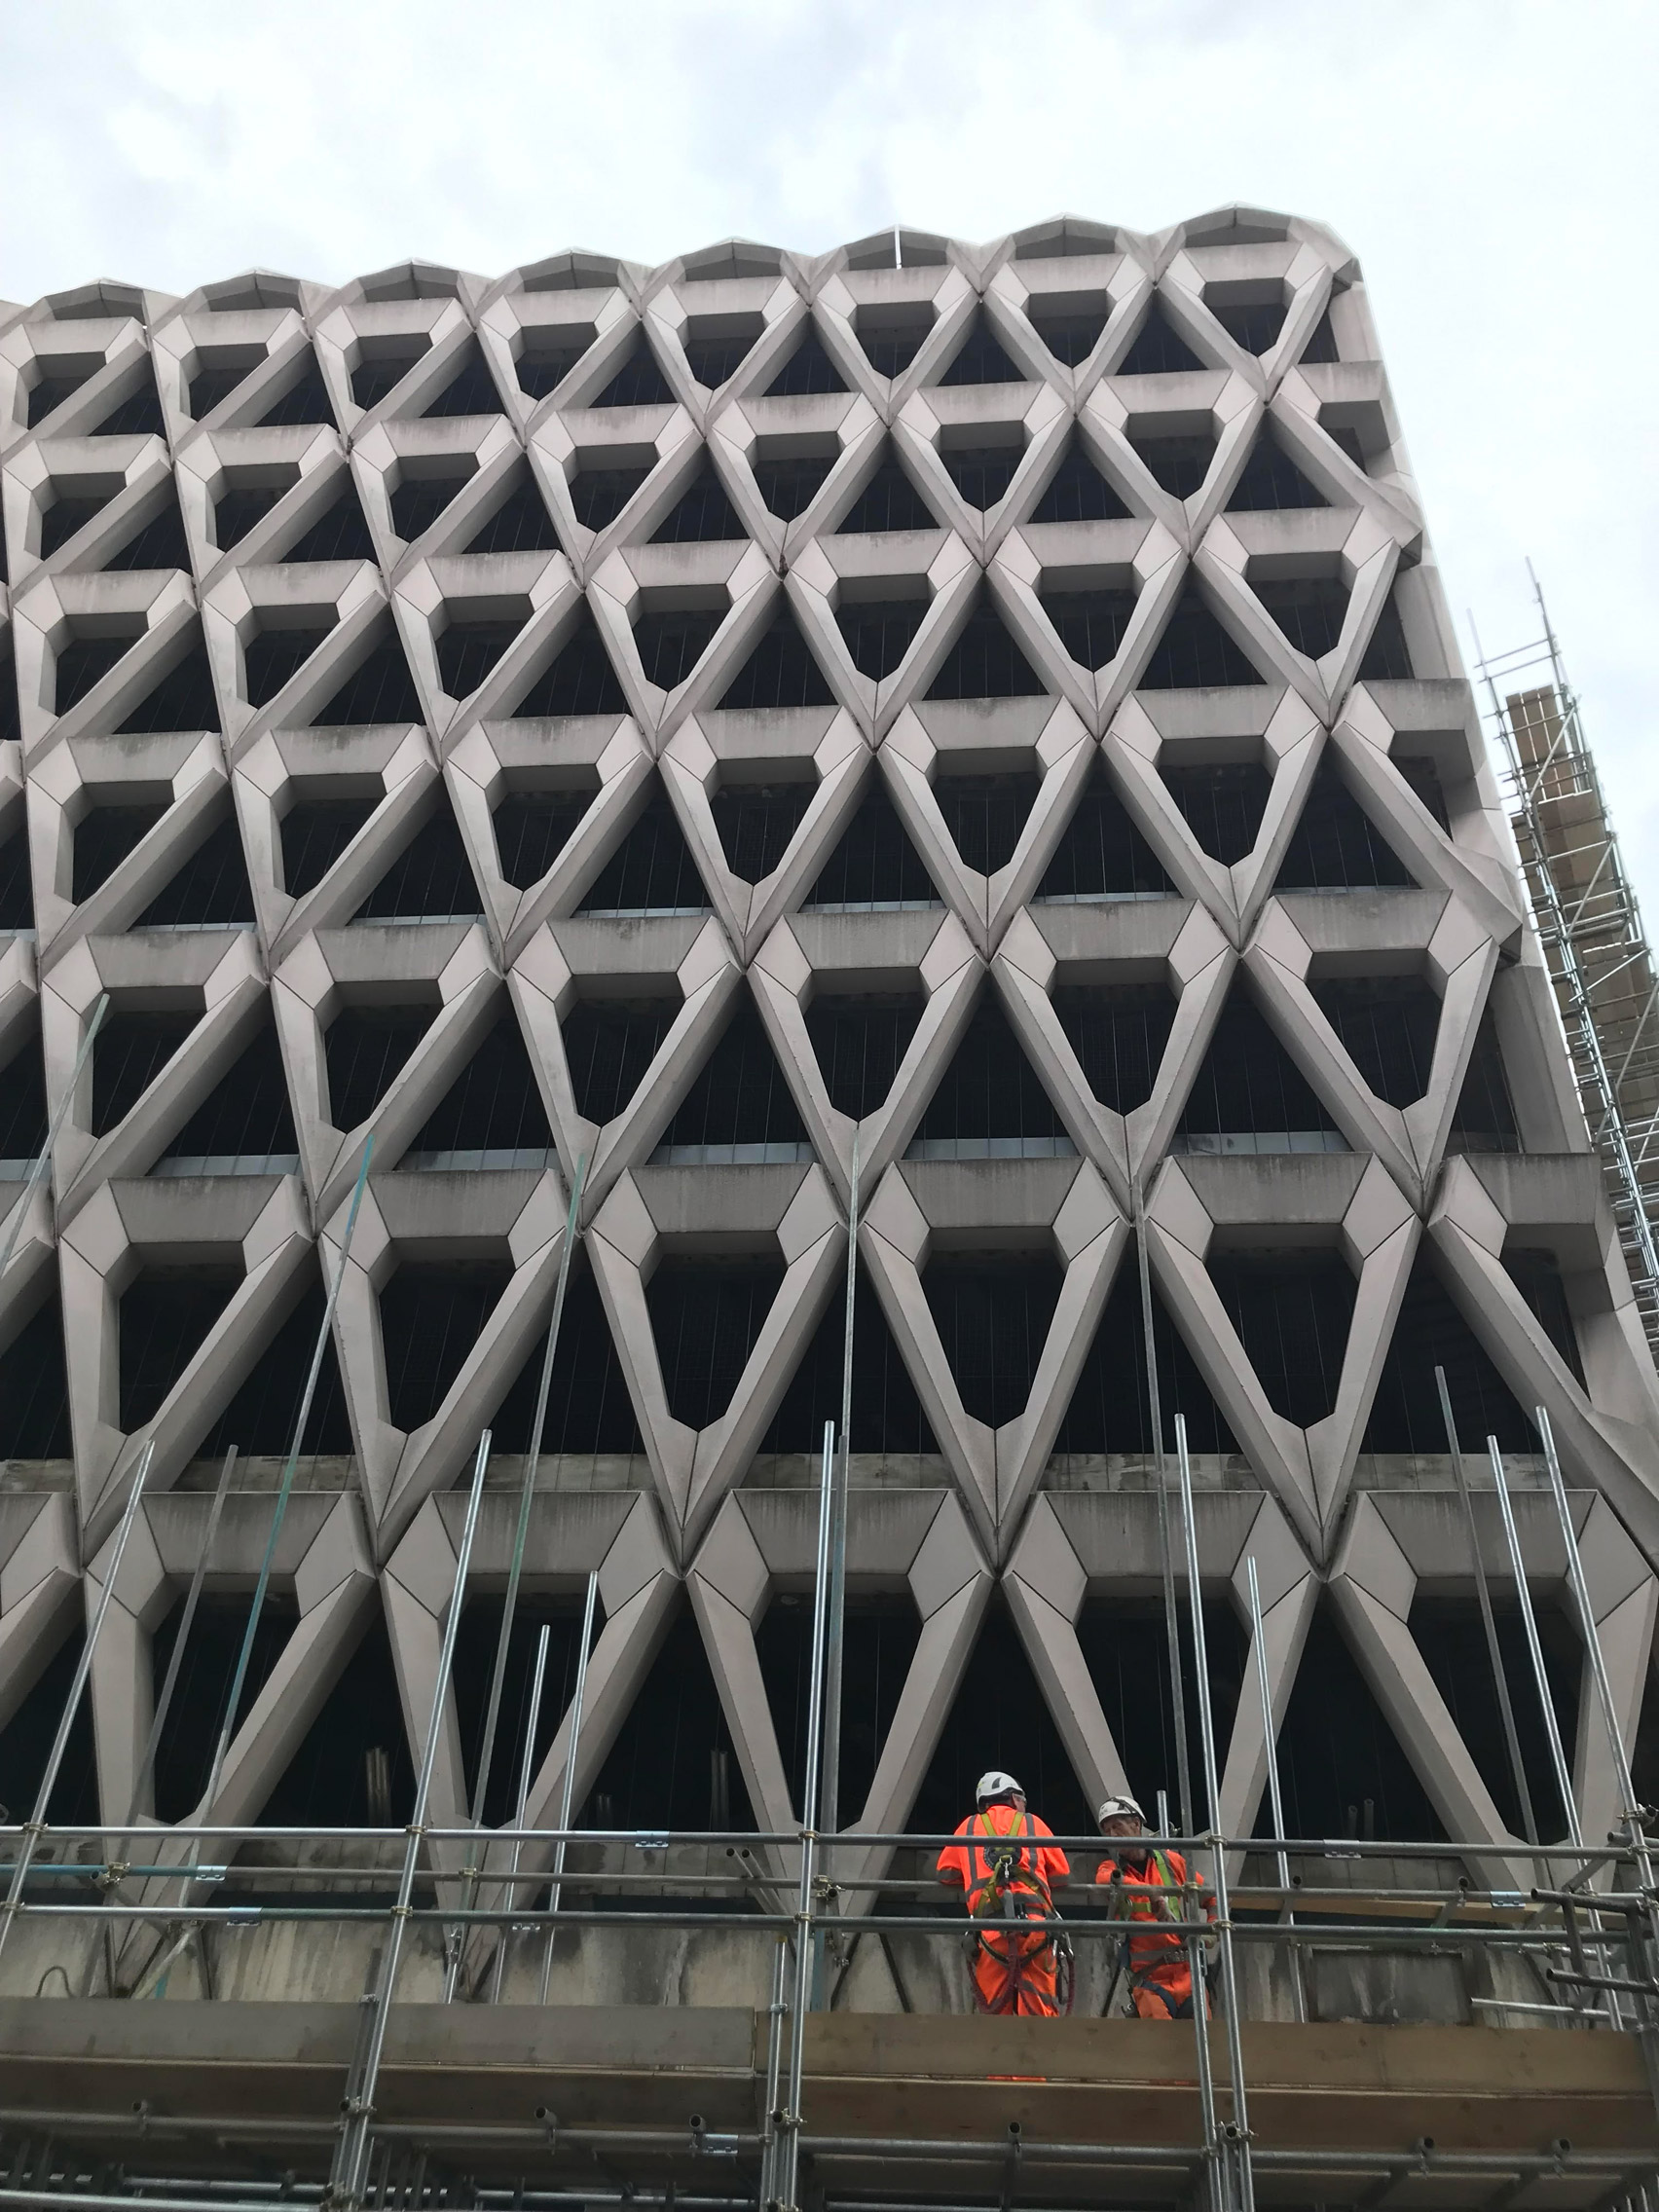 London's brutalist Welbeck Street car park with its distinctive precast concrete facade is being demolished ahead of the site becoming a hotel.